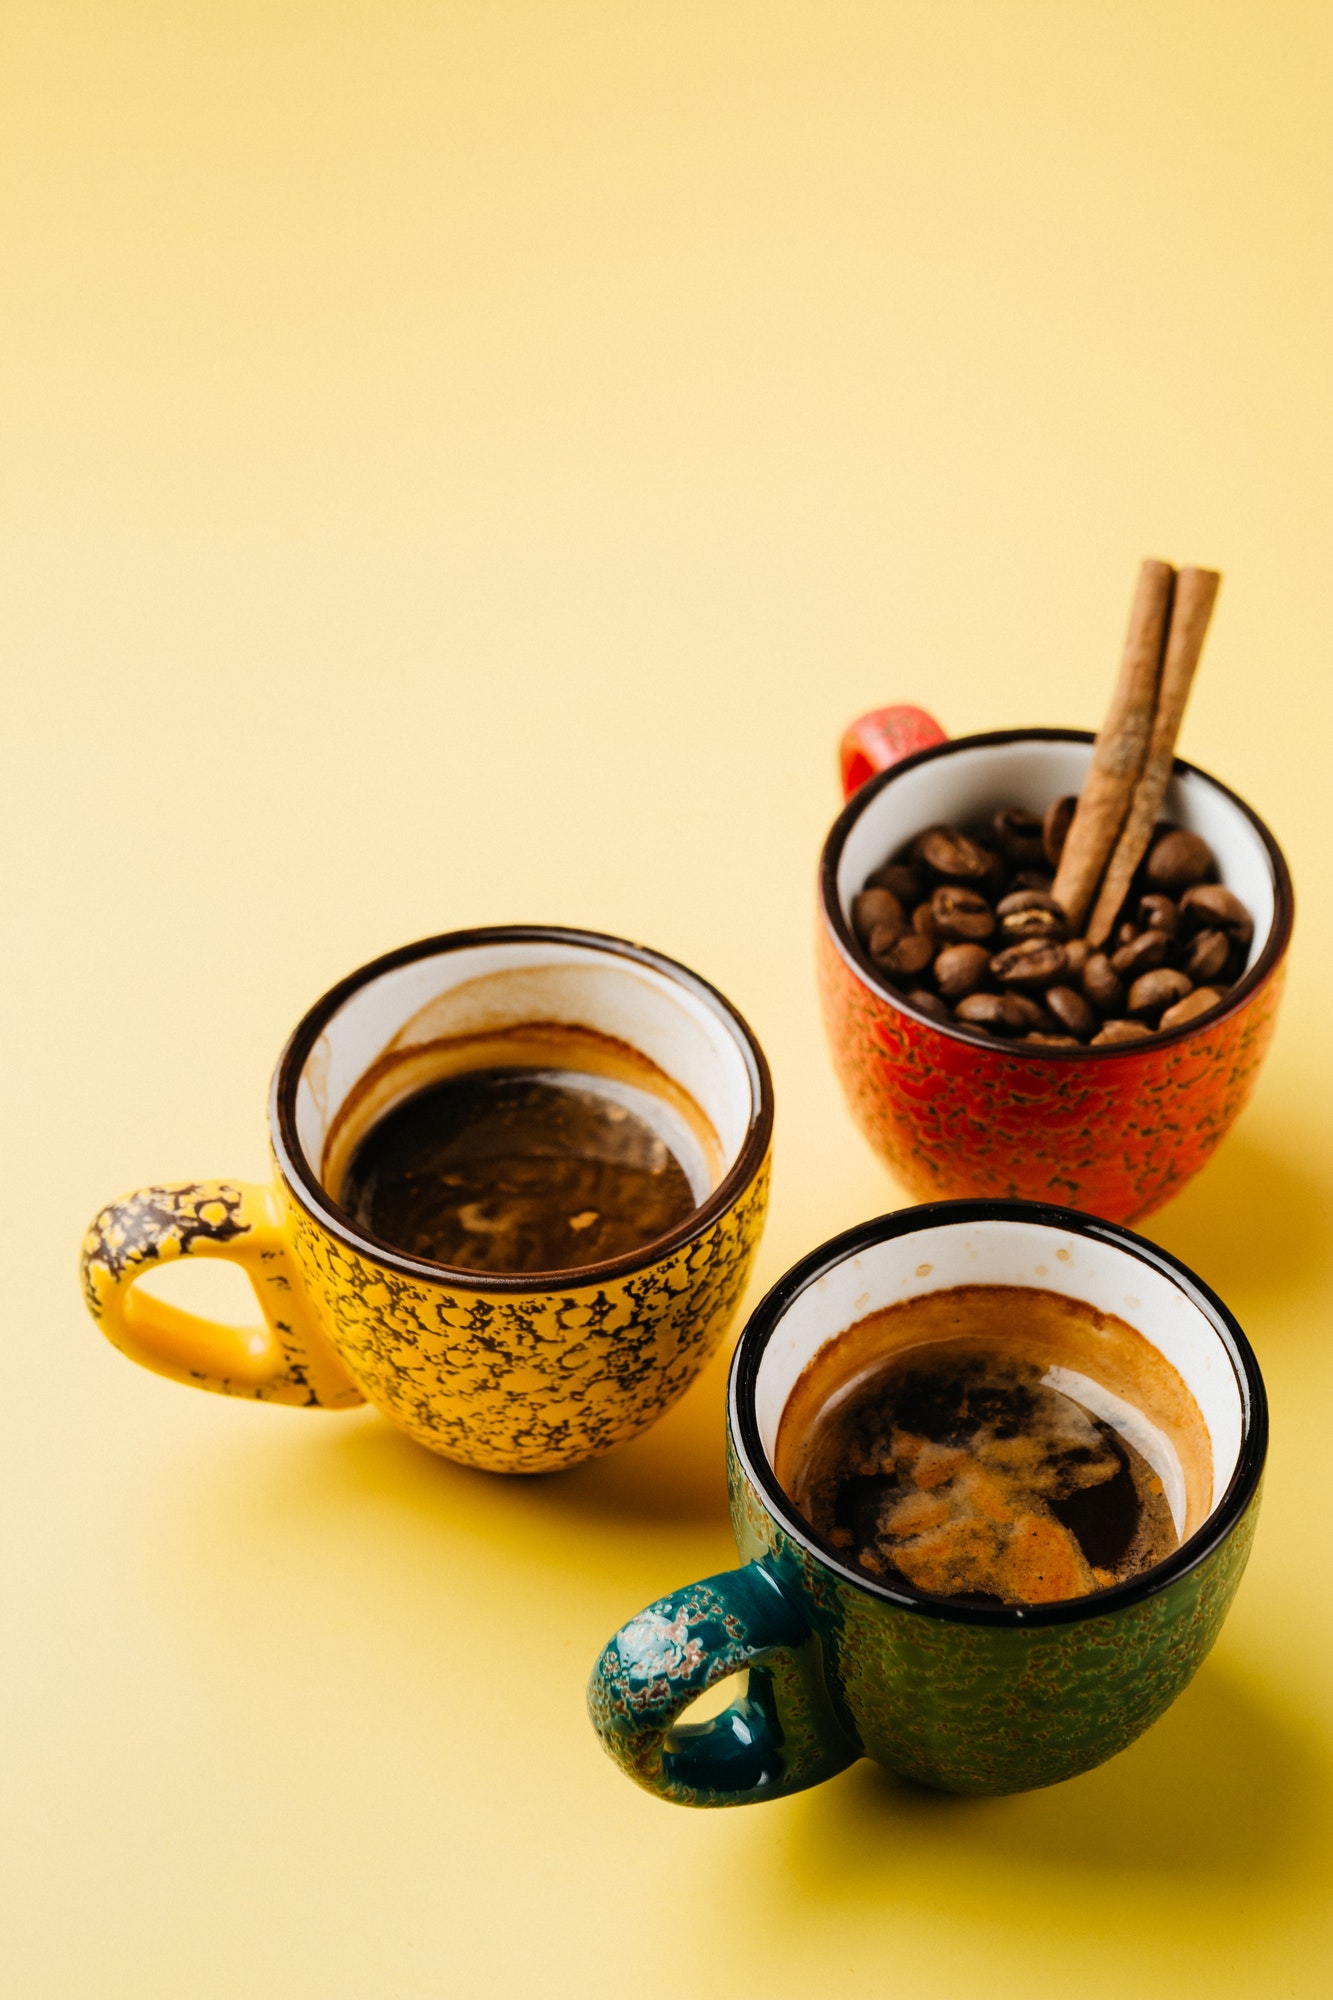 cups with coffee and coffee beans on yellow background